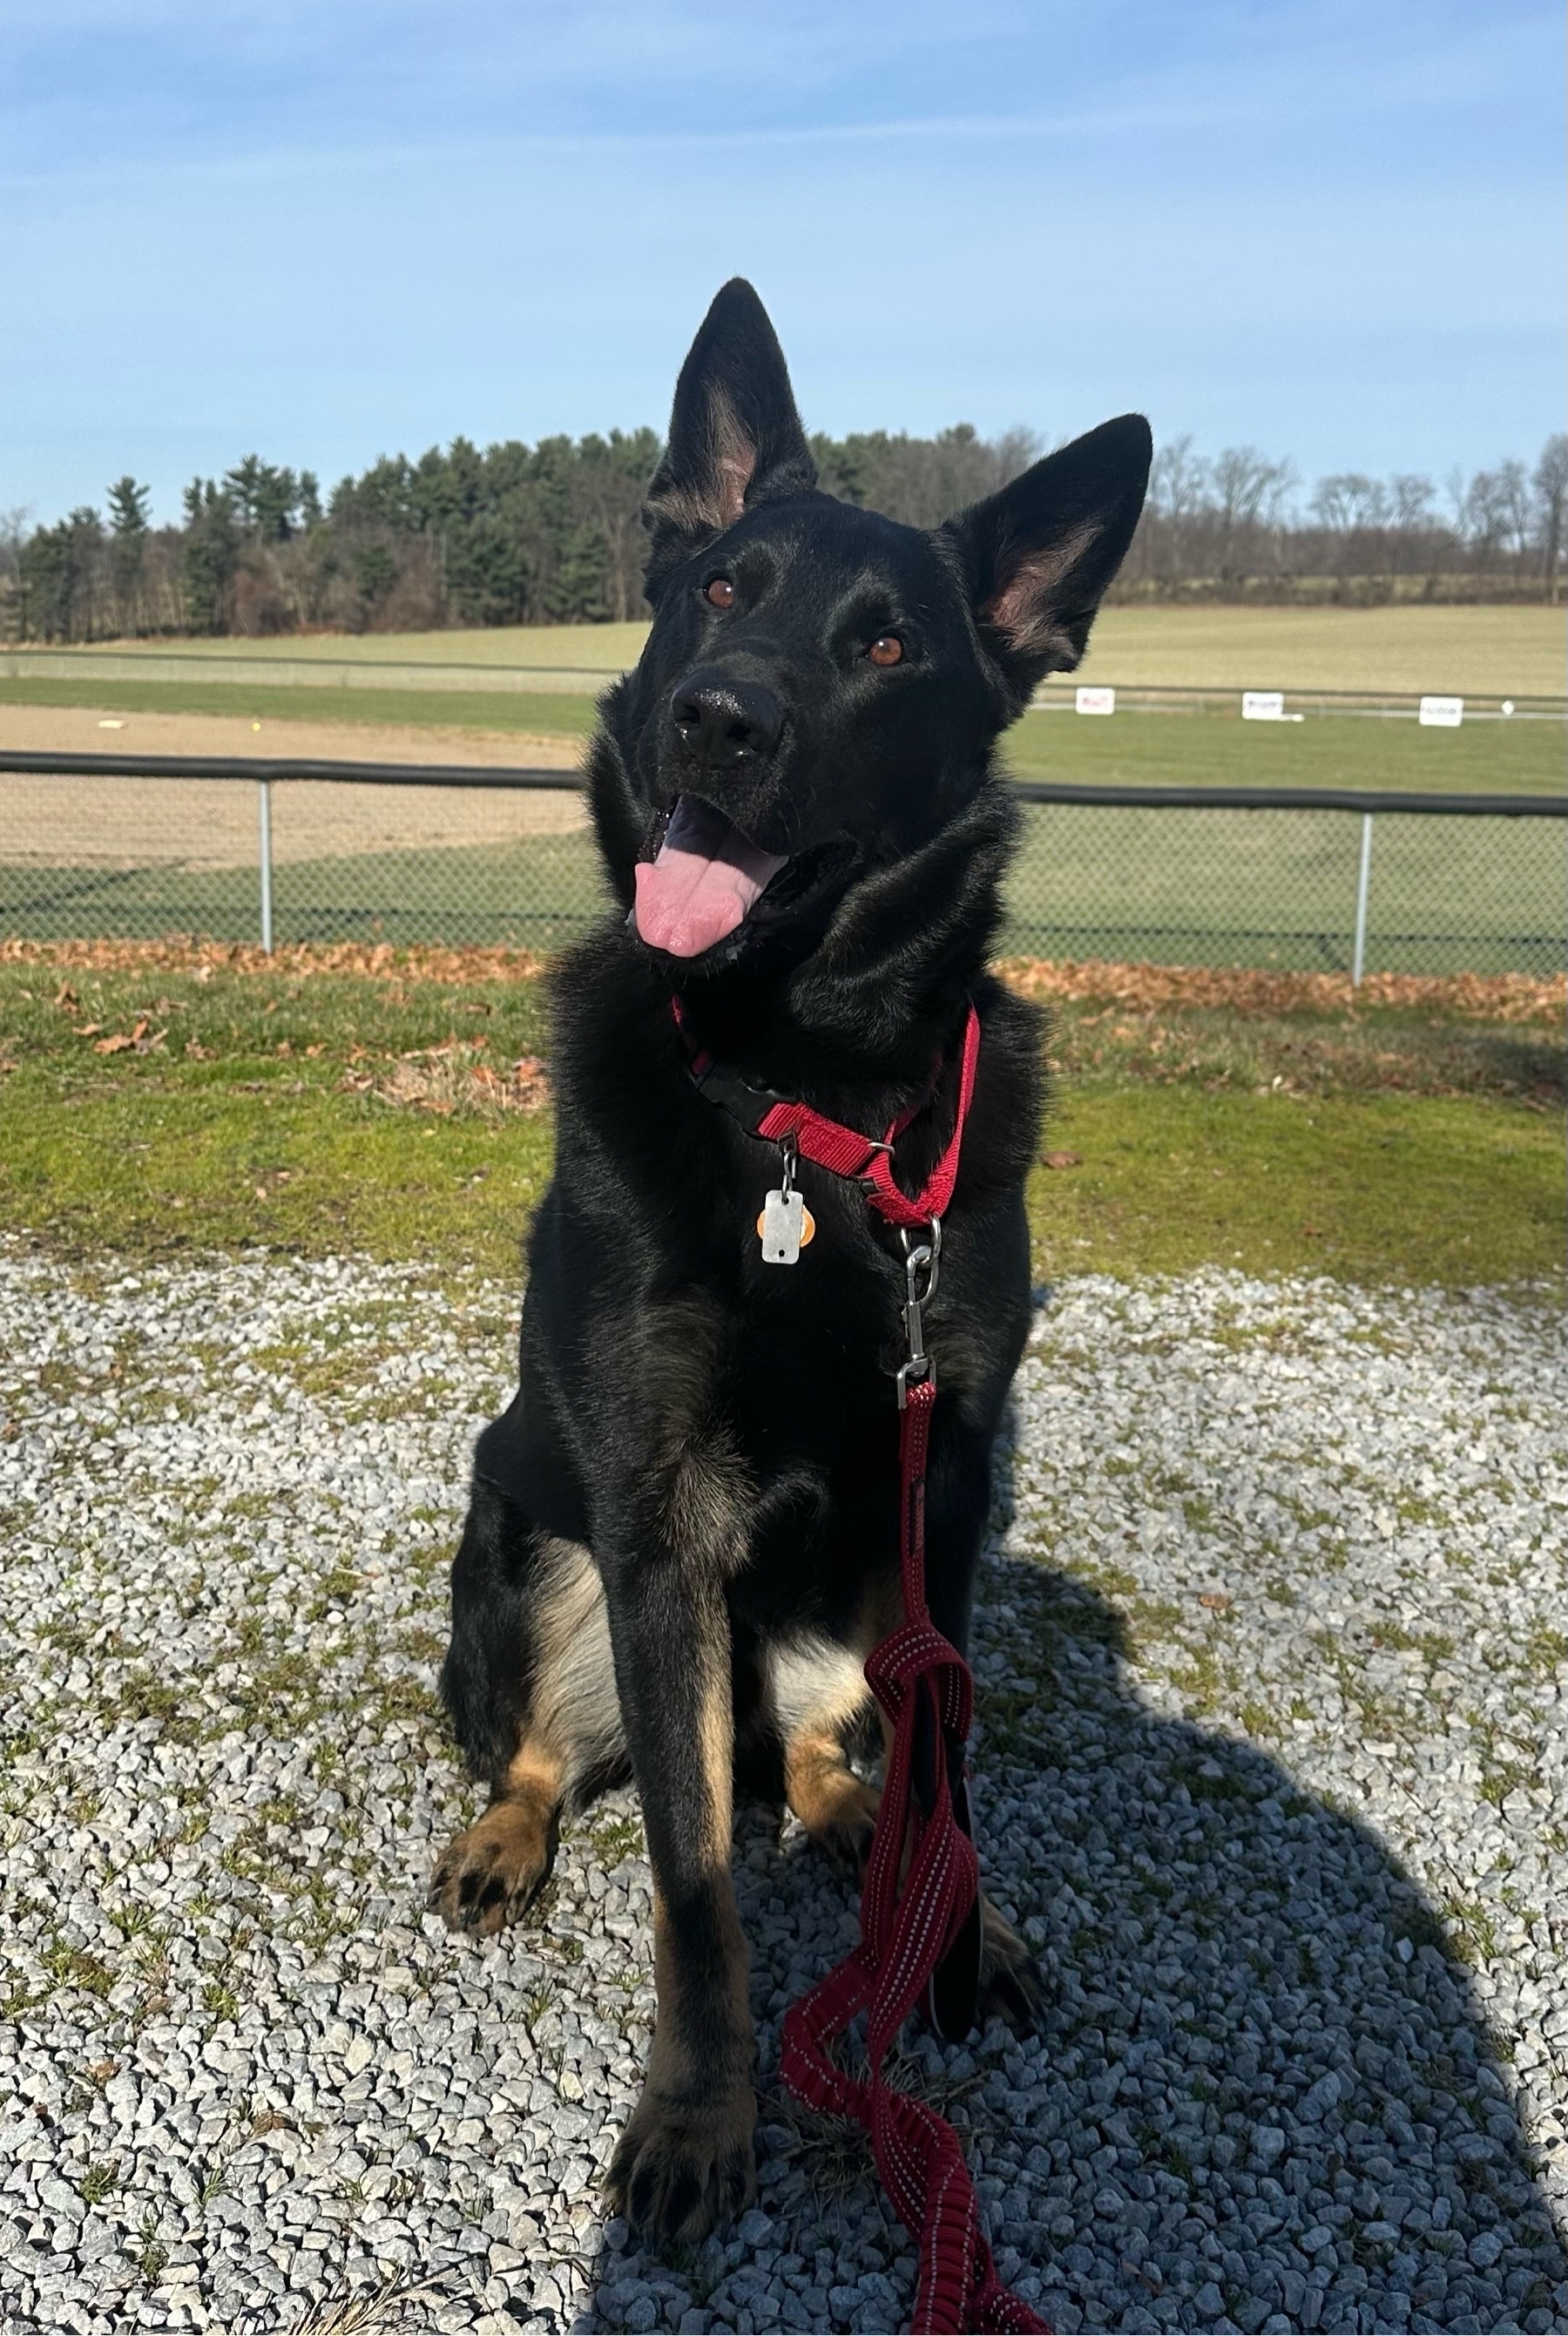 a ridiculously handsome german shepherd strikes a pose, an empty baseball field in the background, blue sky above.